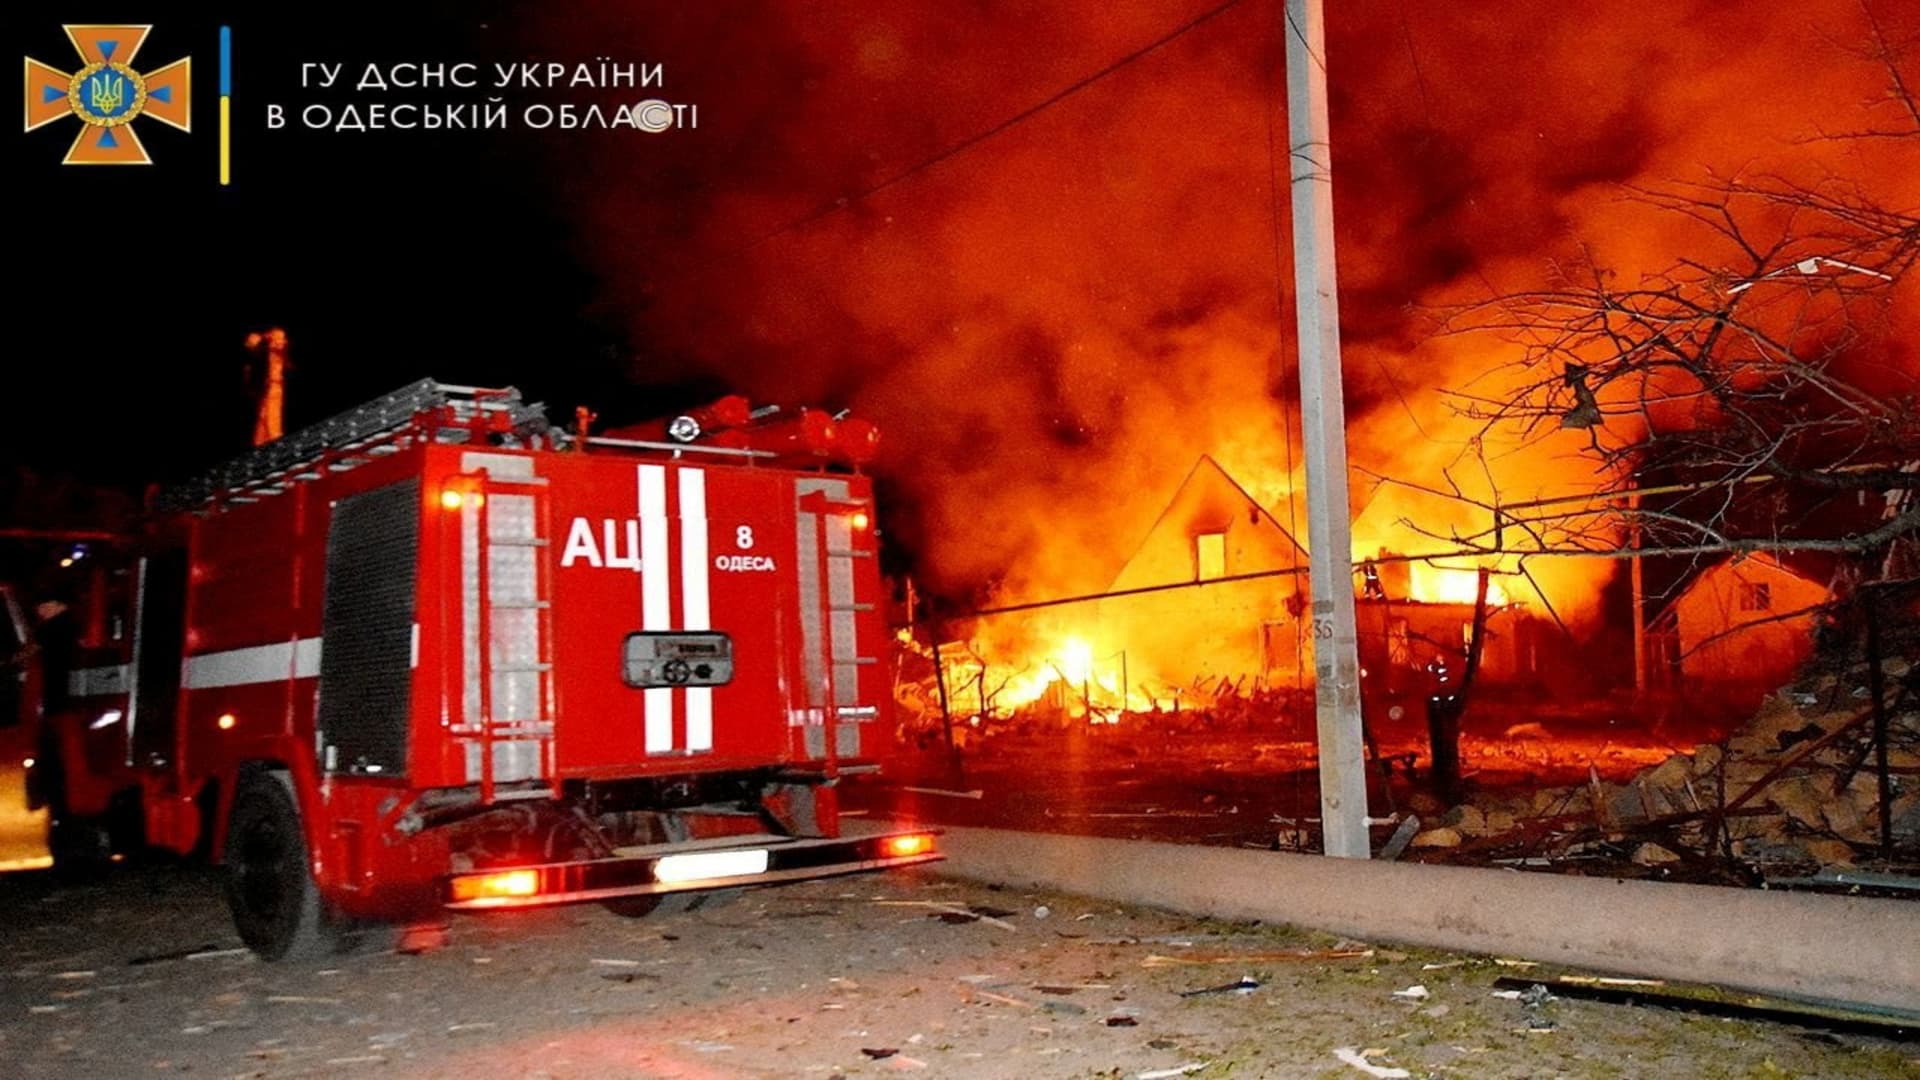 A general view shows a fire engine at a scene of a burning building after a shelling, as Russia's invasion of Ukraine continues in a location given as Odesa, Ukraine in this picture obtained from social media released on July 19, 2022.